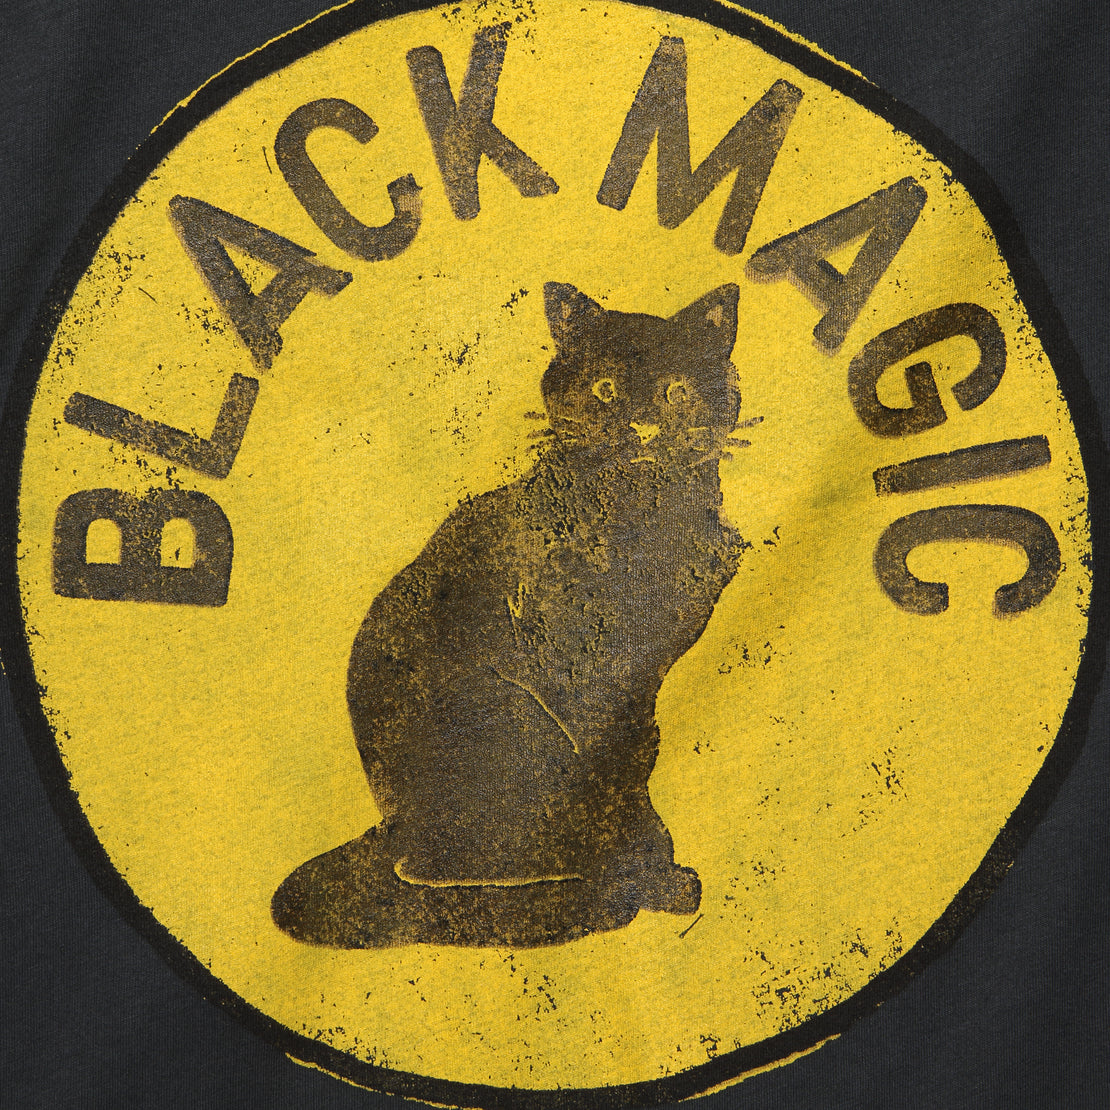 Black Magic Tee - Black - Imogene + Willie - STAG Provisions - Tops - S/S Tee - Graphic